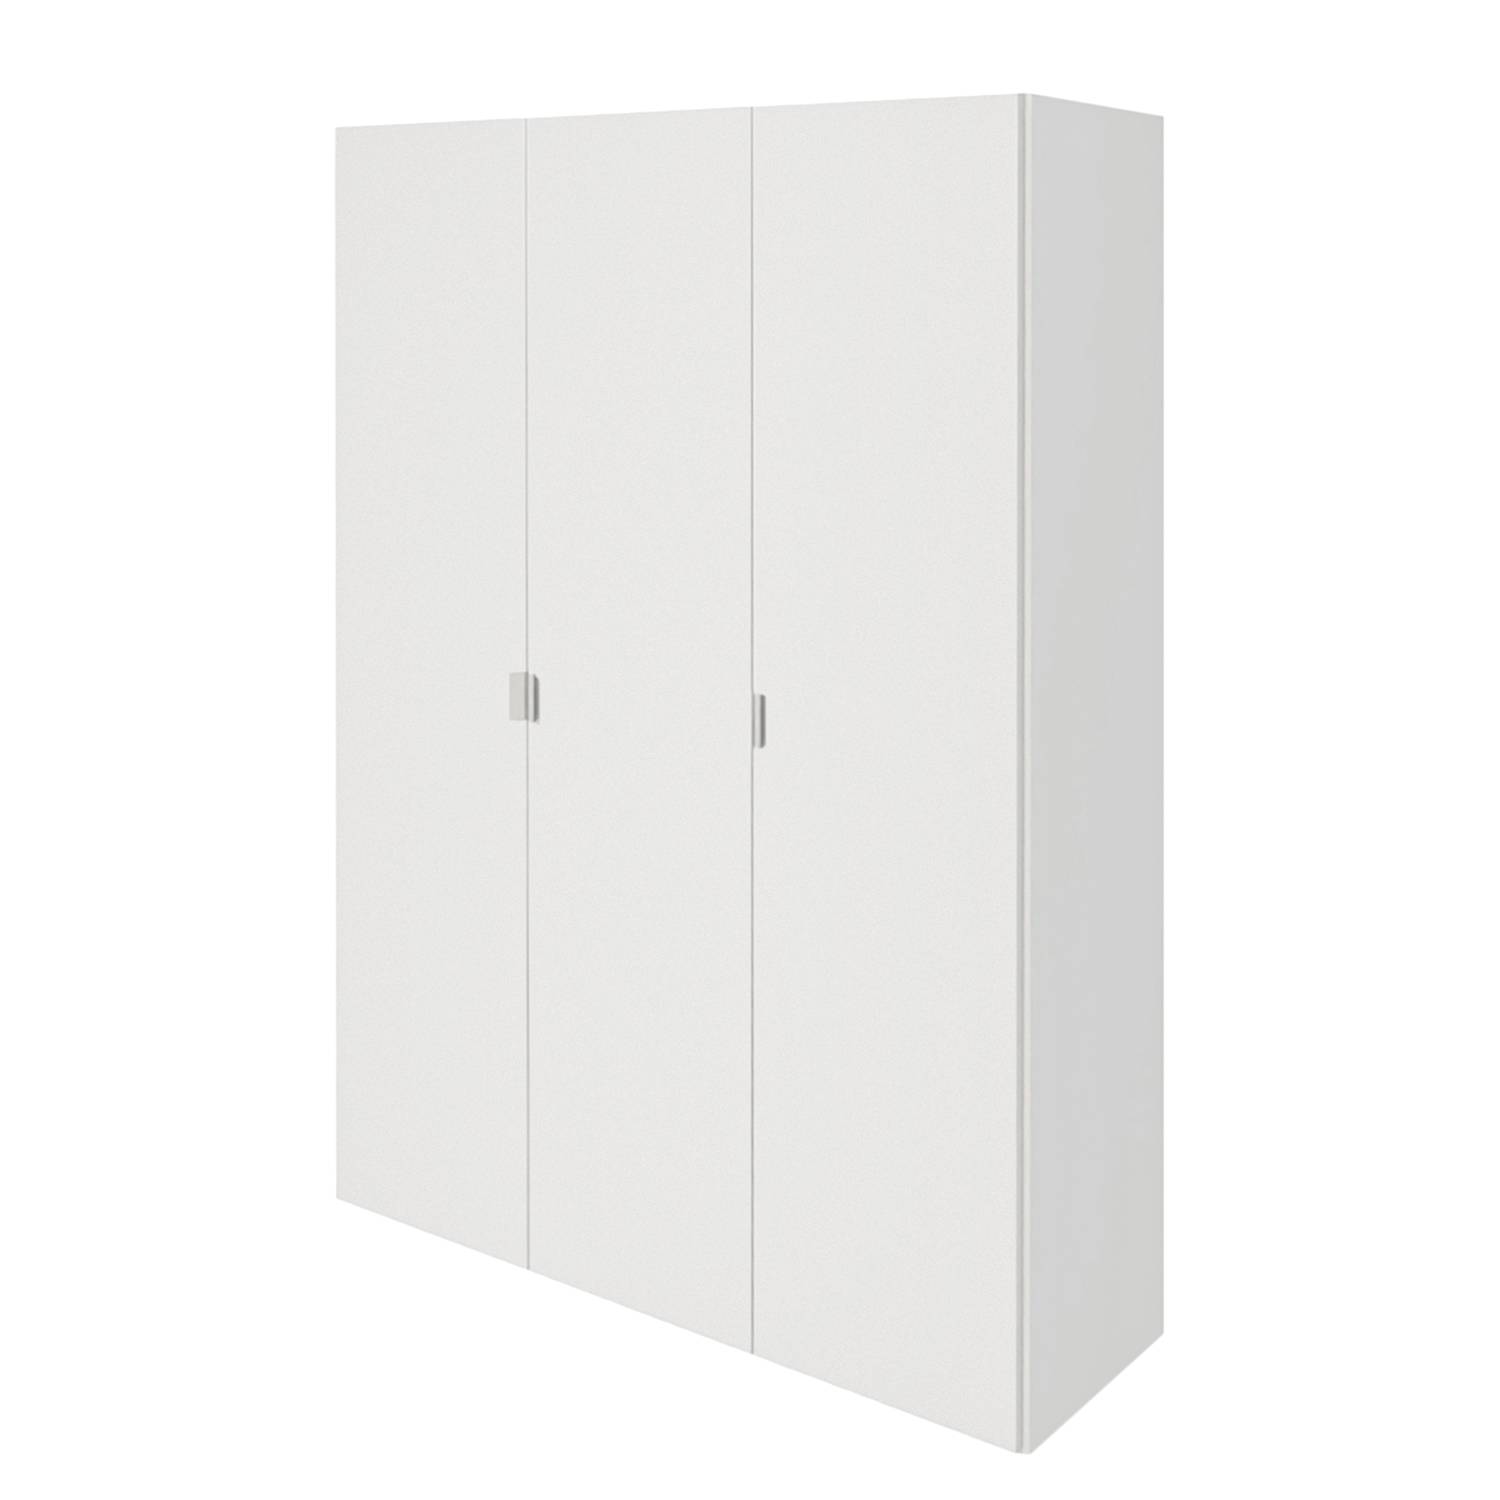 Image of Armoire huelsta now basic 000000001000190300